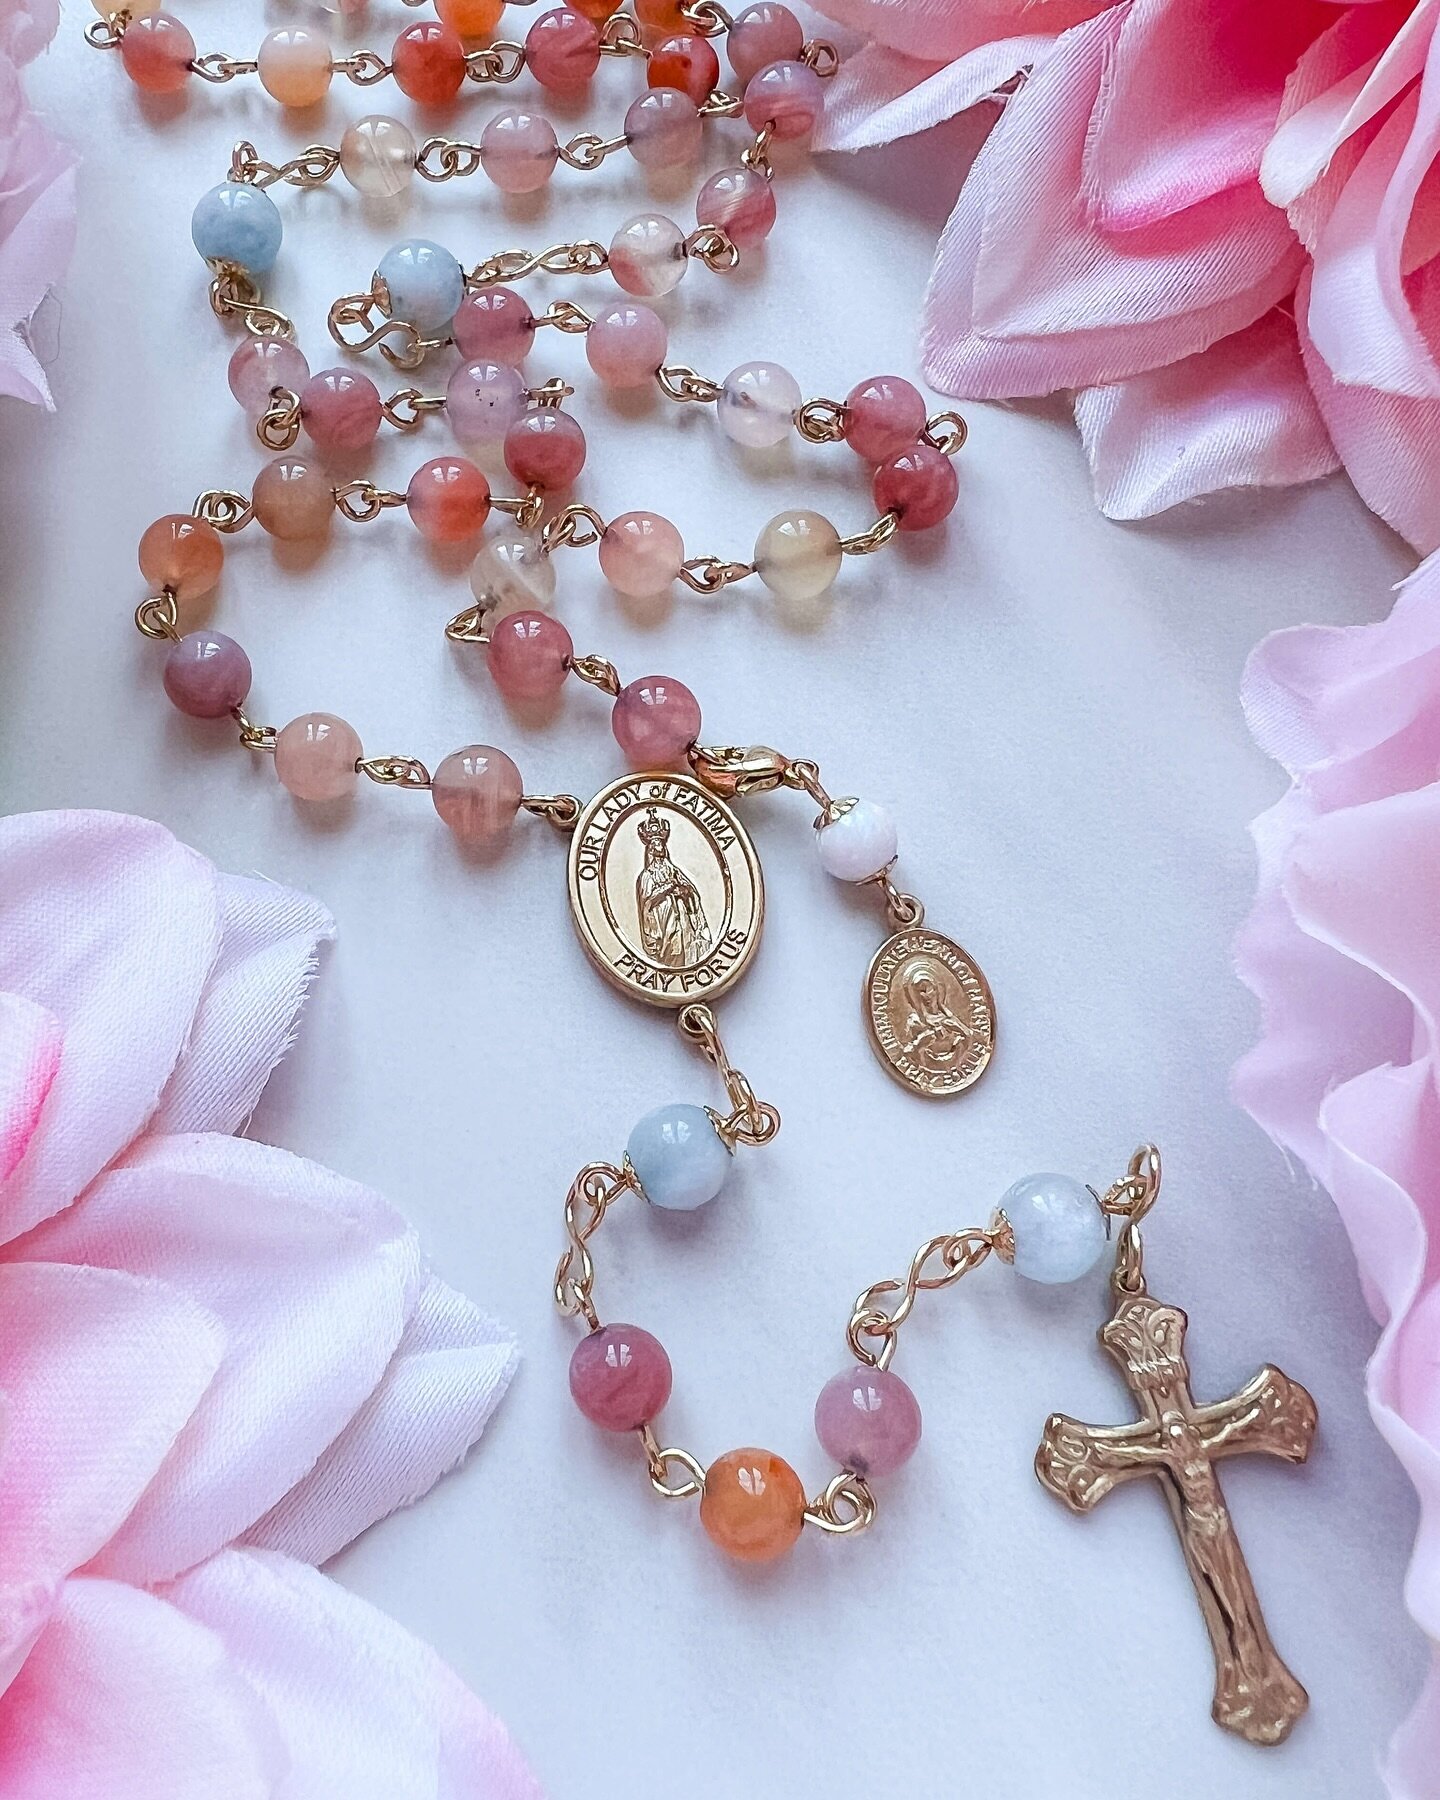 He is Risen! Alleluia, alleluia 💛

Sunset agate rosary with Our Lady of Fatima center and white opal Immaculate Heart of Mary rosary charm. 

#livolsirosaries #catholic #rosary #rosarymaker #customrosary #tradcat #traditionalcatholic #catholicbusine